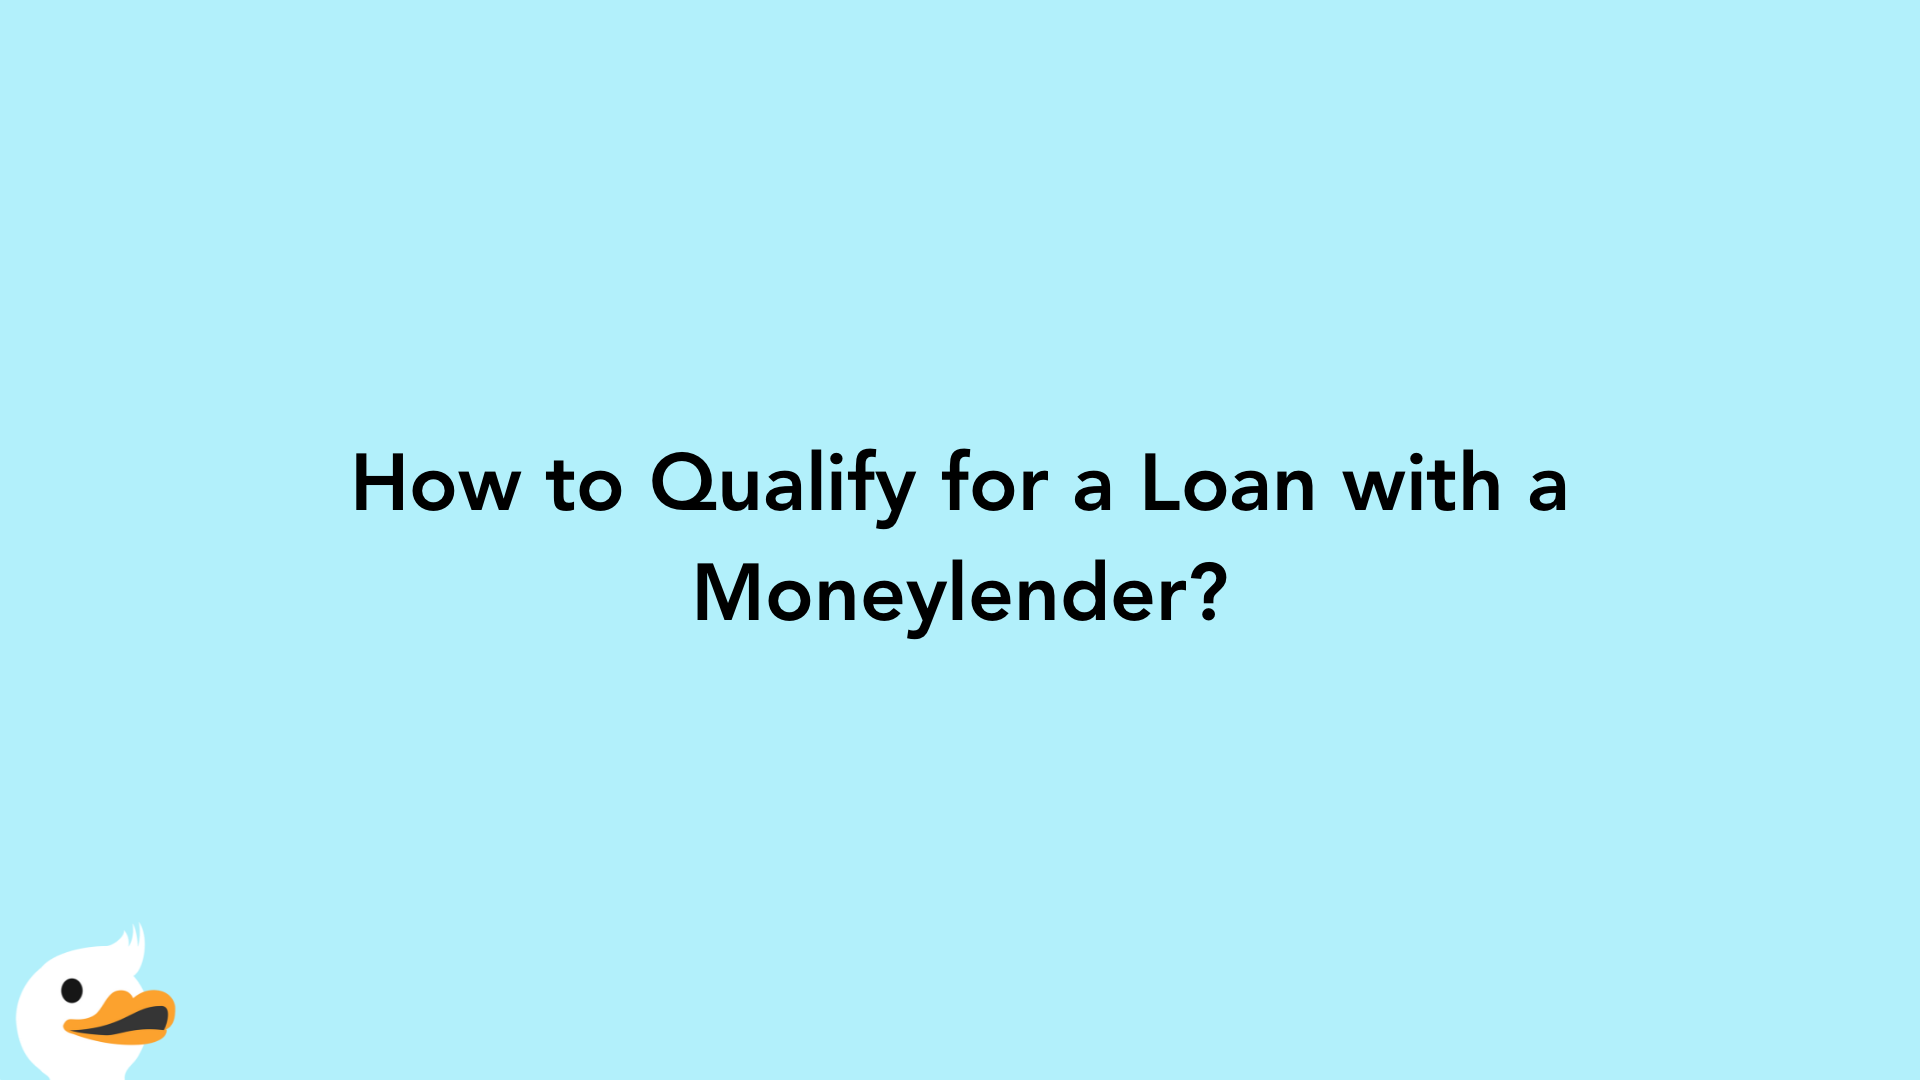 How to Qualify for a Loan with a Moneylender?